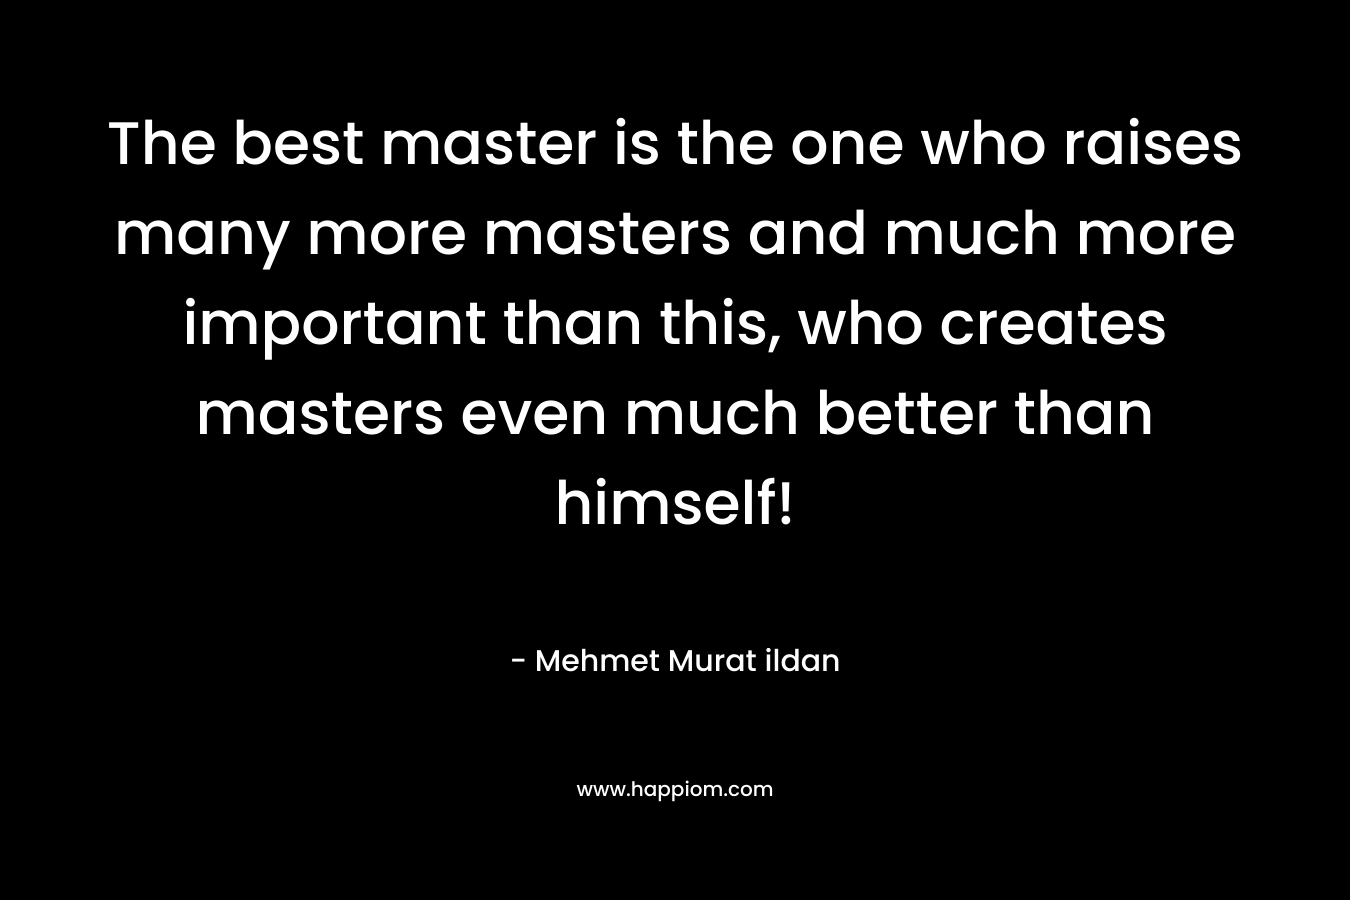 The best master is the one who raises many more masters and much more important than this, who creates masters even much better than himself!